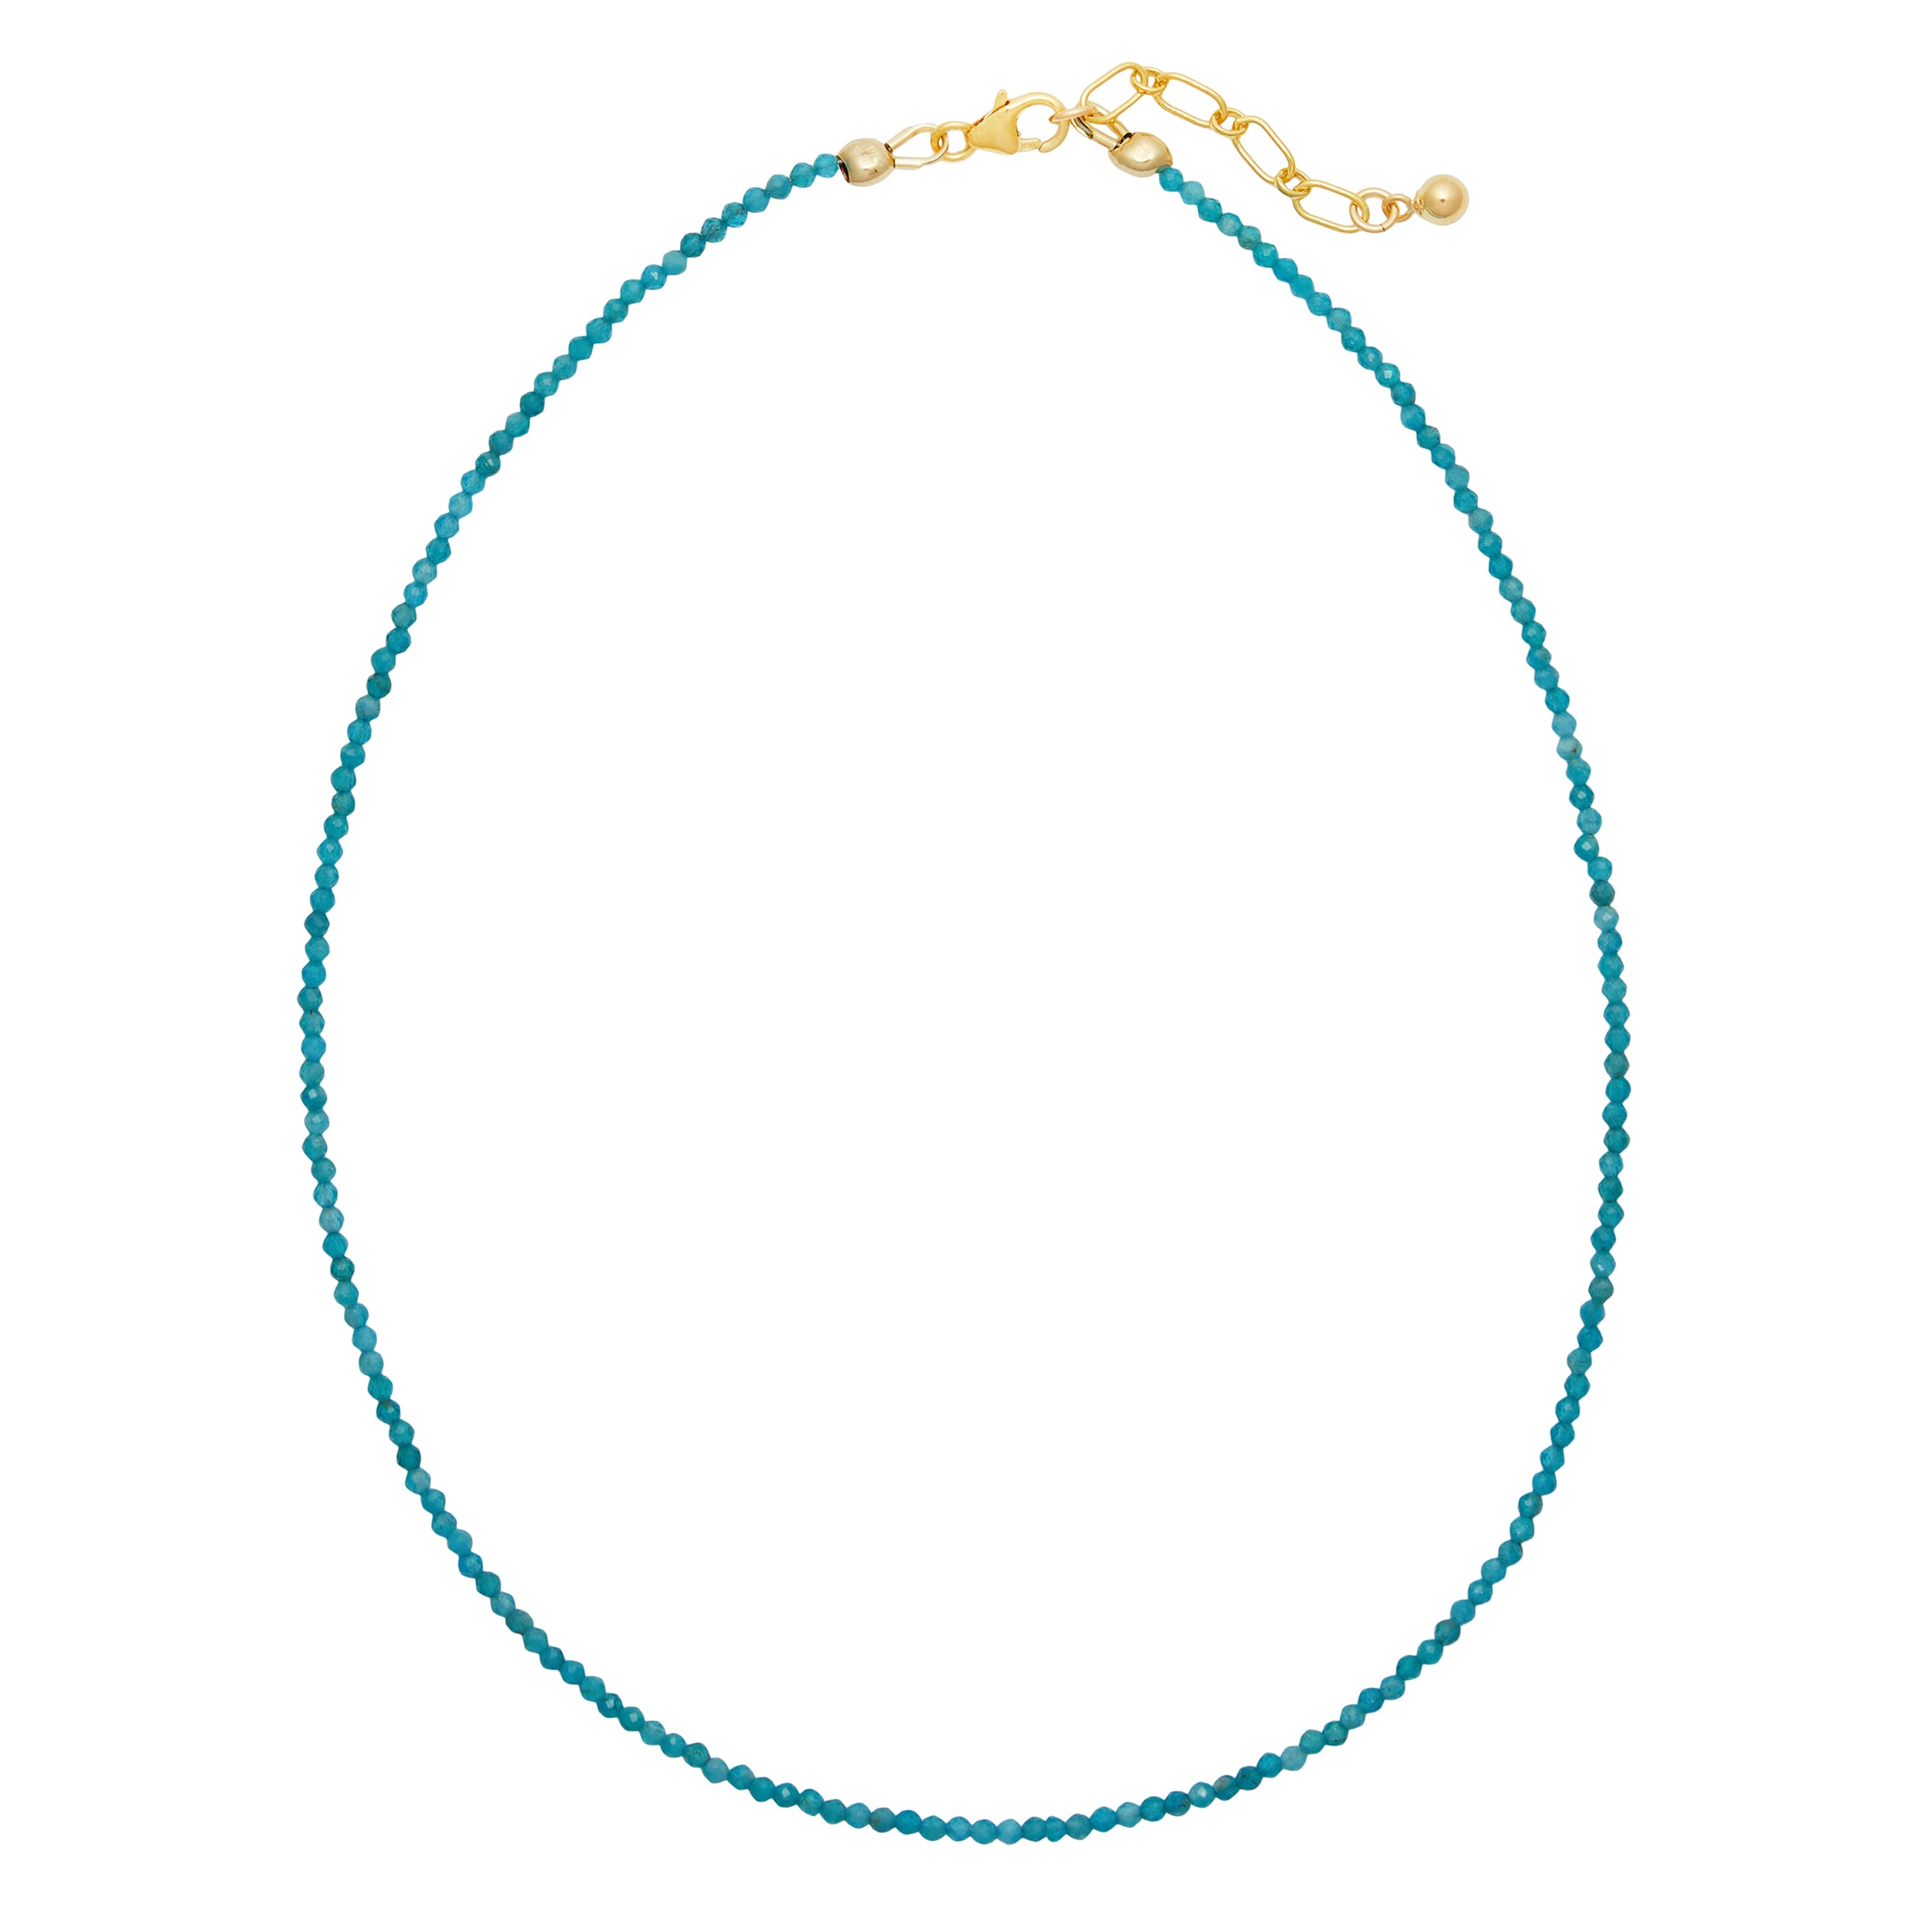 The Strand Necklace